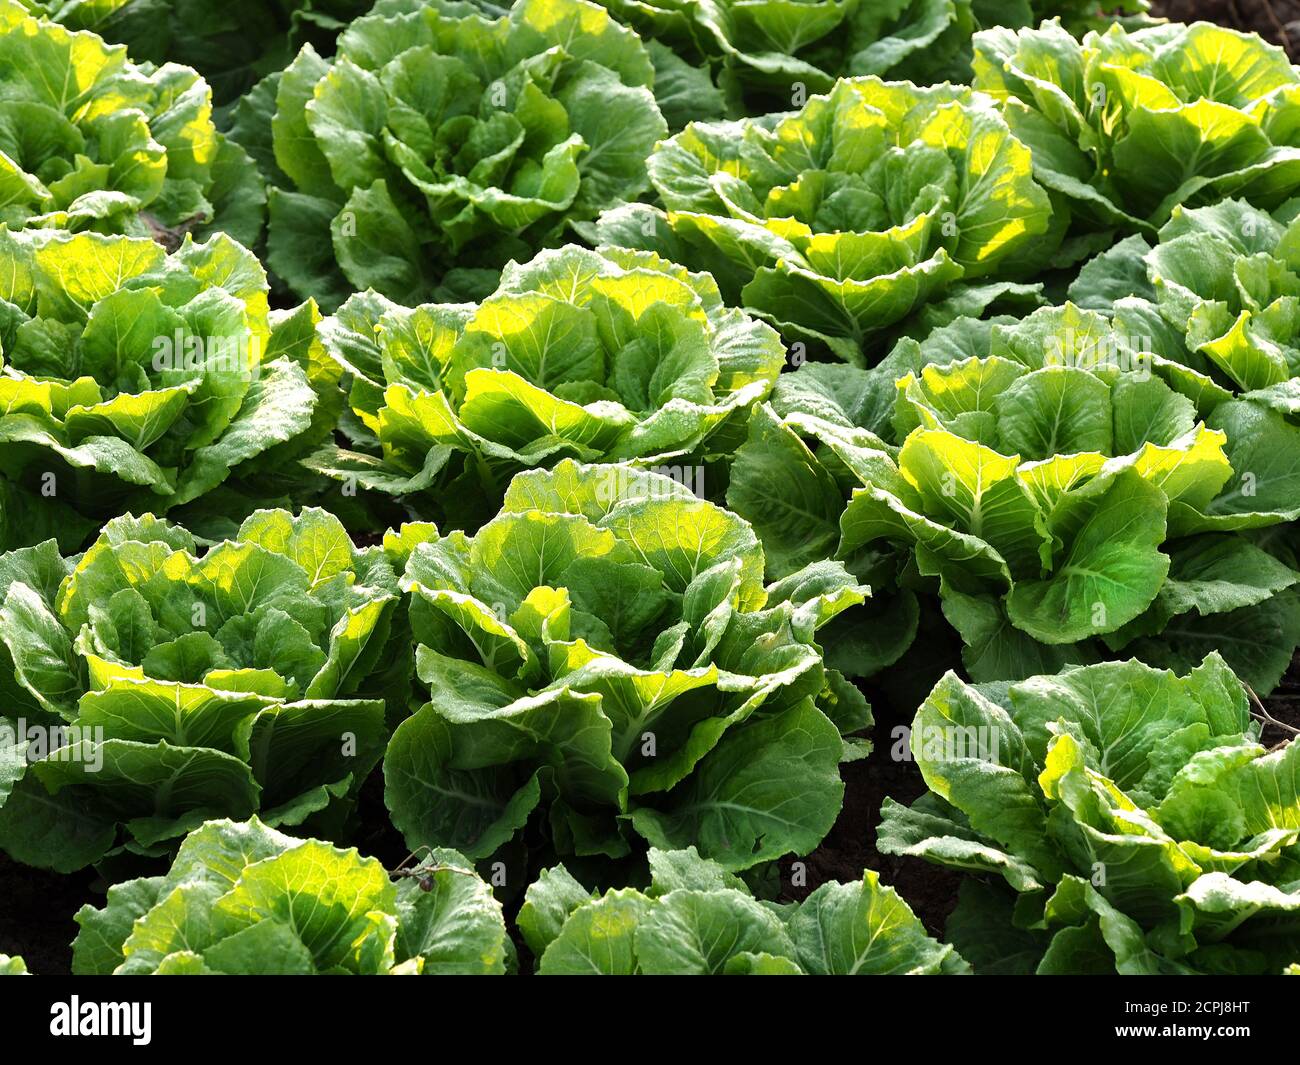 Cabbage field with young cabbage. Partially blurred picture. Stock Photo